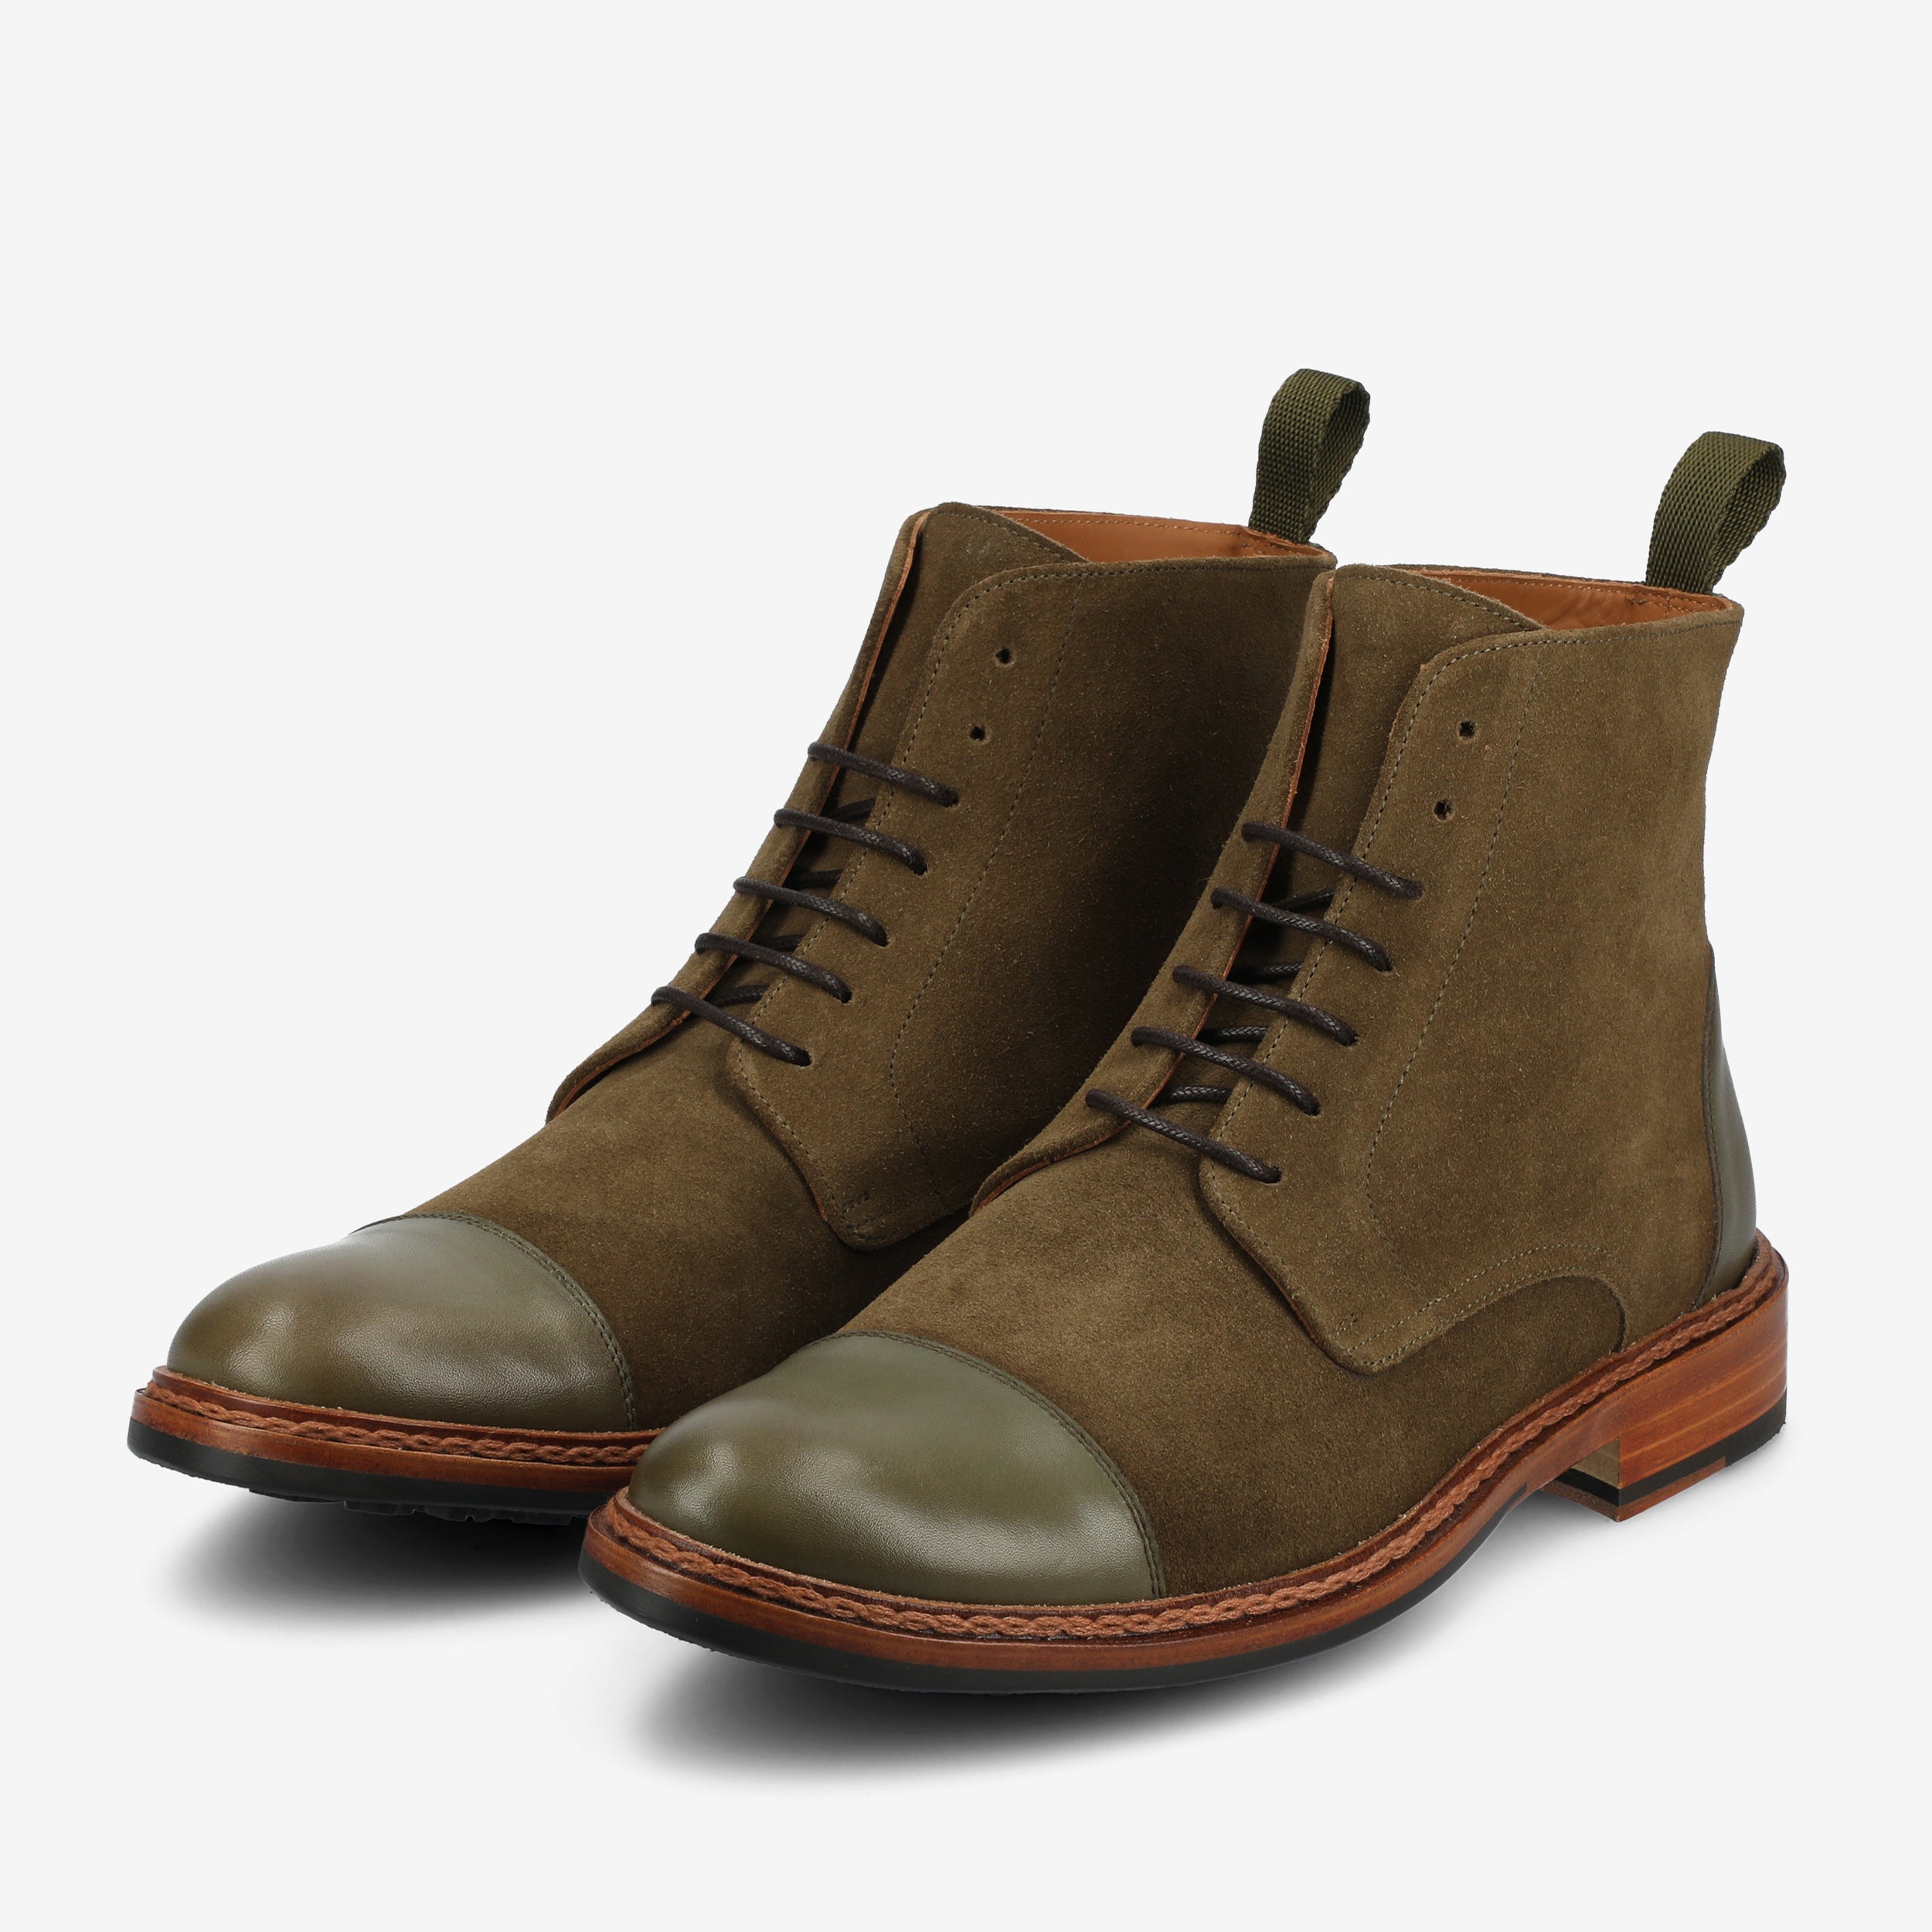 The Troy Boot in Olive